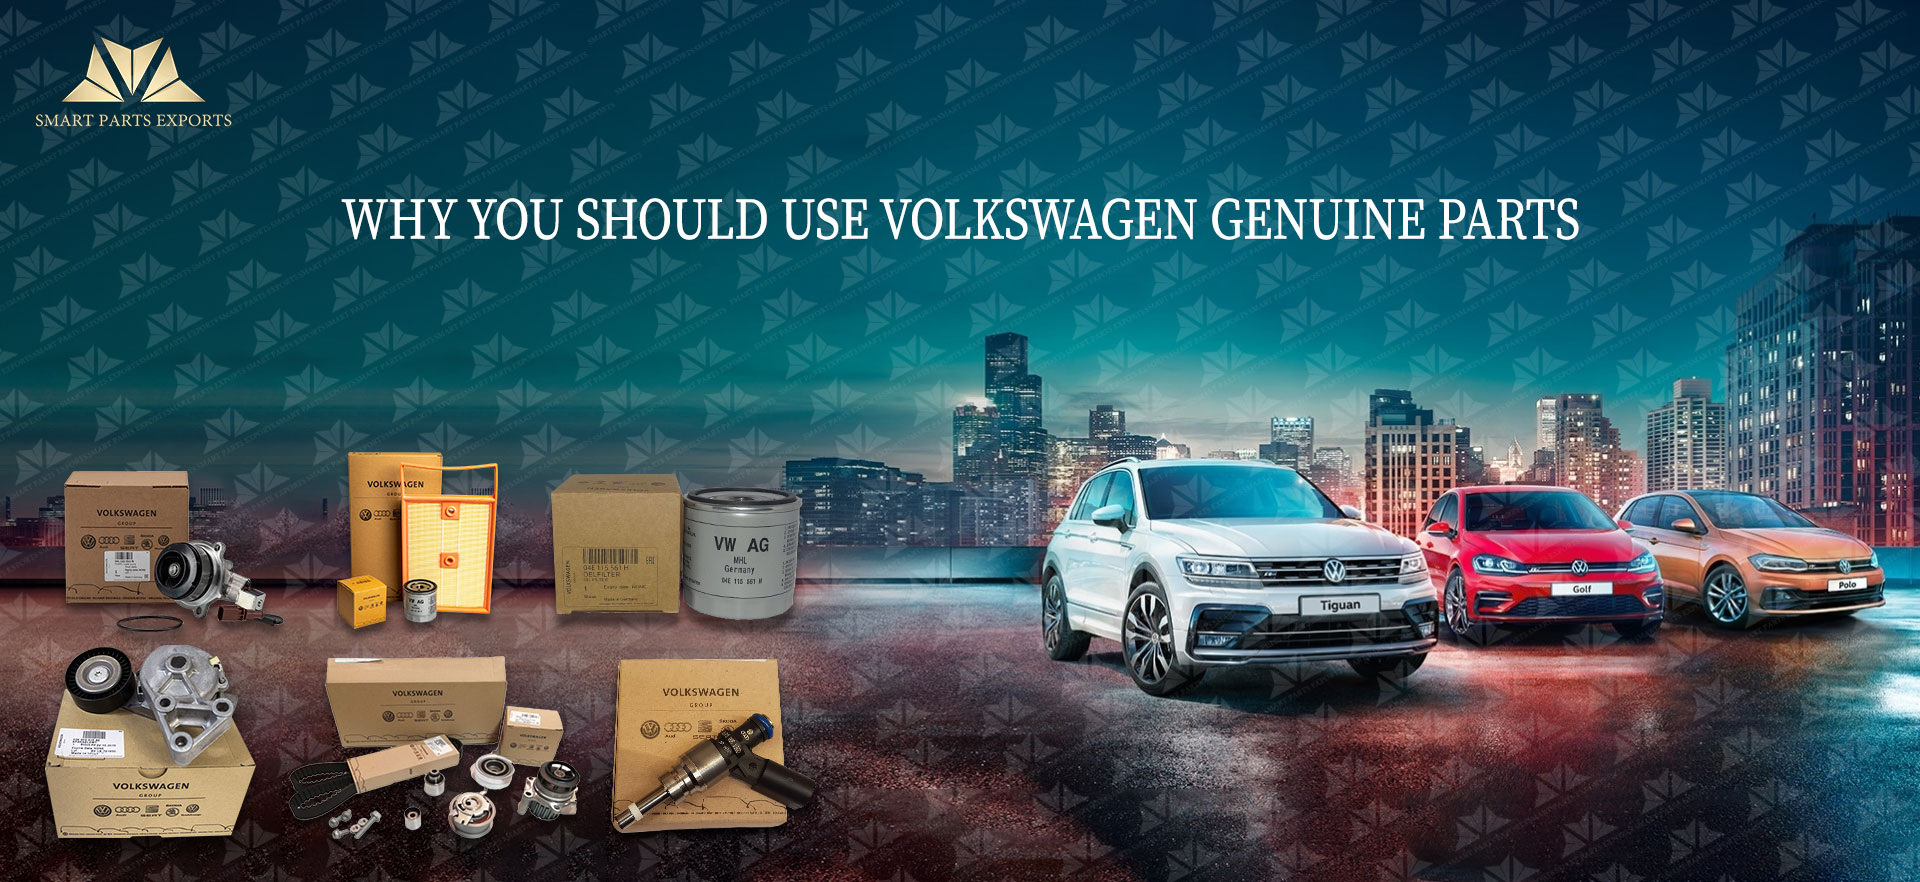 Why You Should Use Volkswagen Genuine Parts